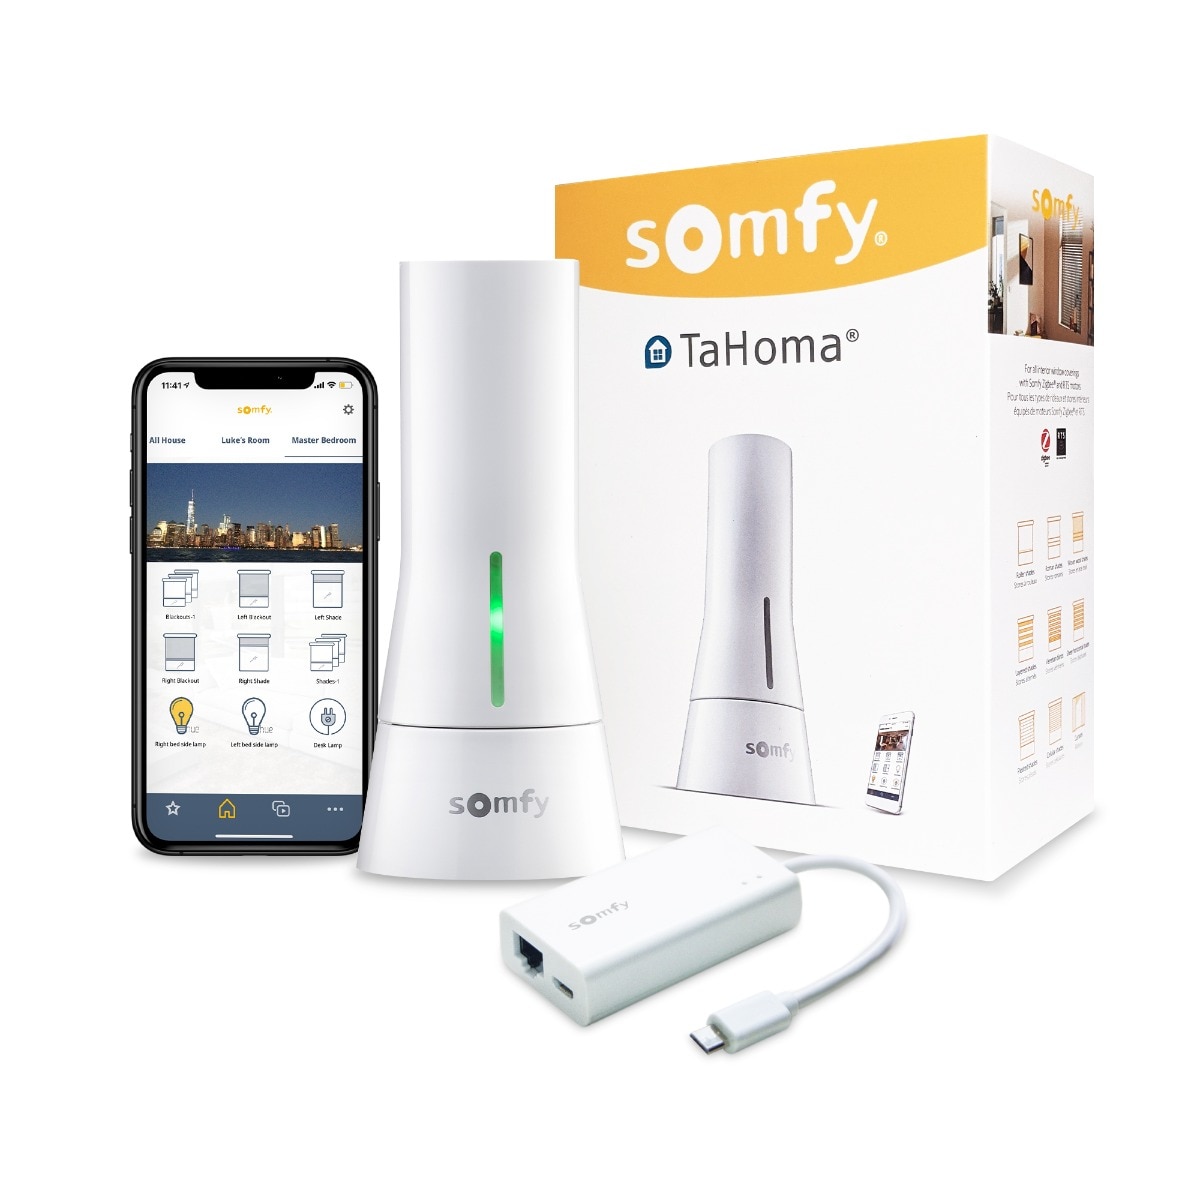 Video: 6 Features of the Somfy TaHoma You Need to Know. - Umbra